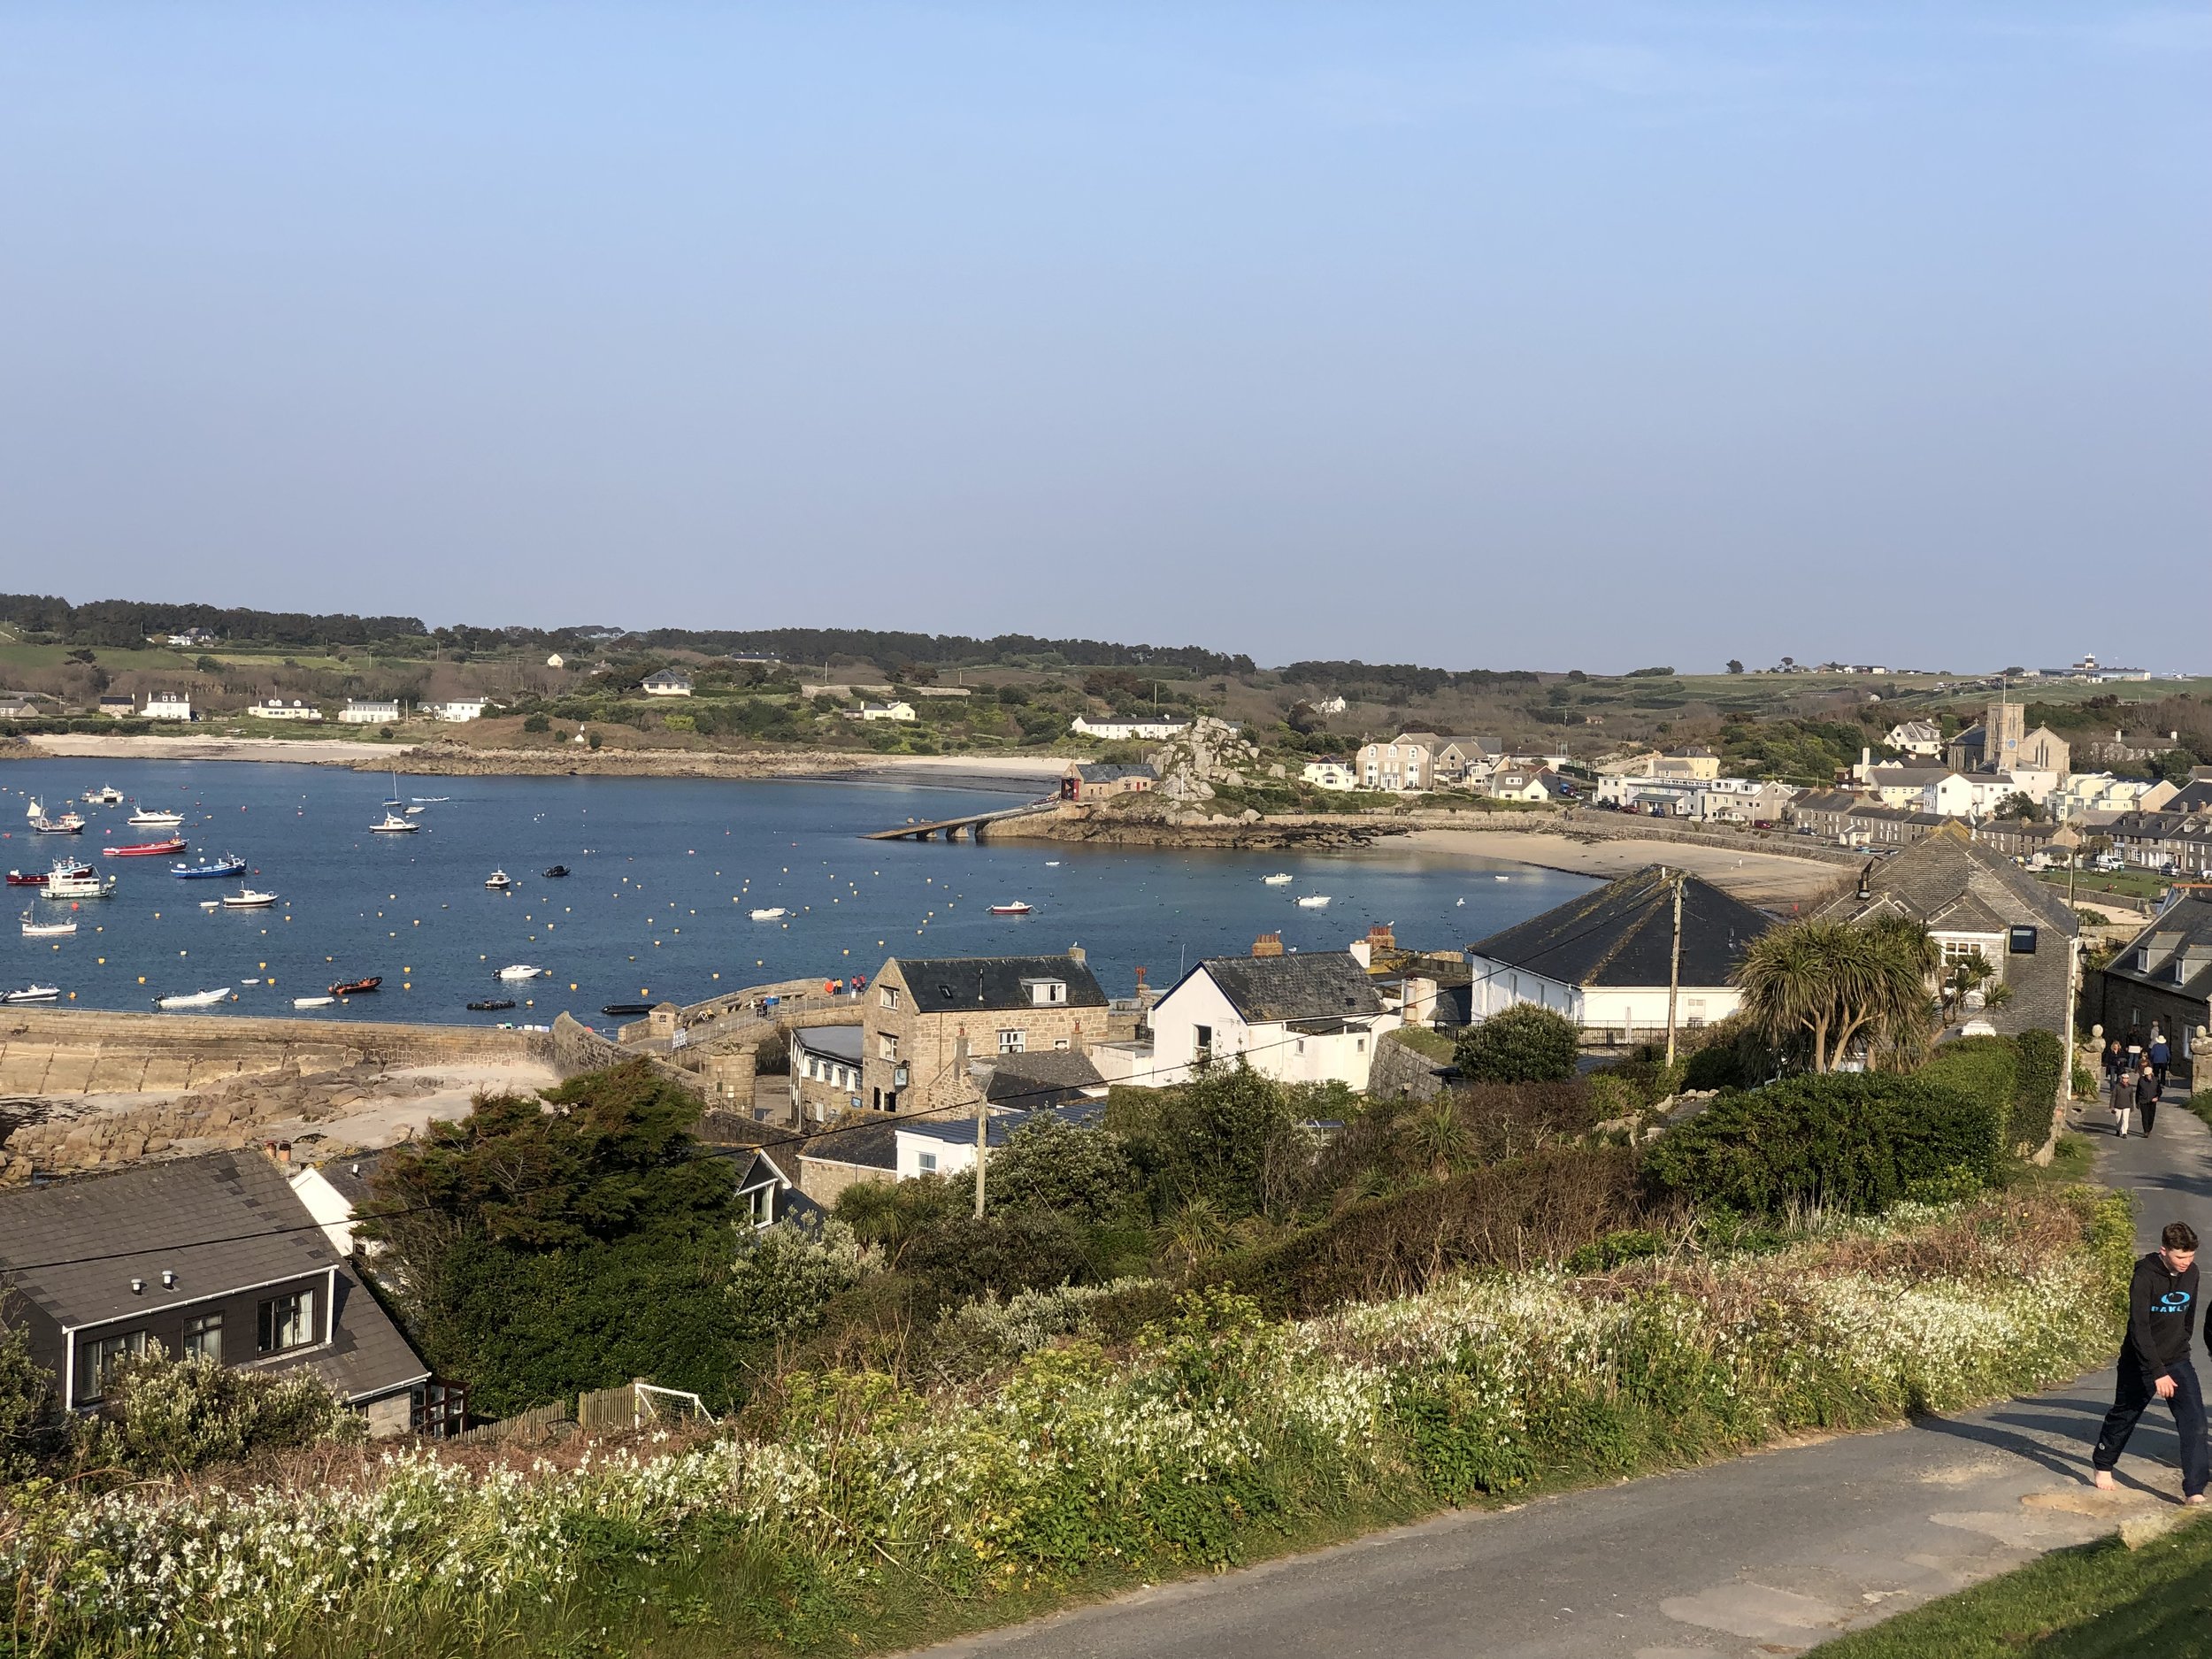 VIEW FROMstar castle hotel, isles of scilly, st. marys.jpg